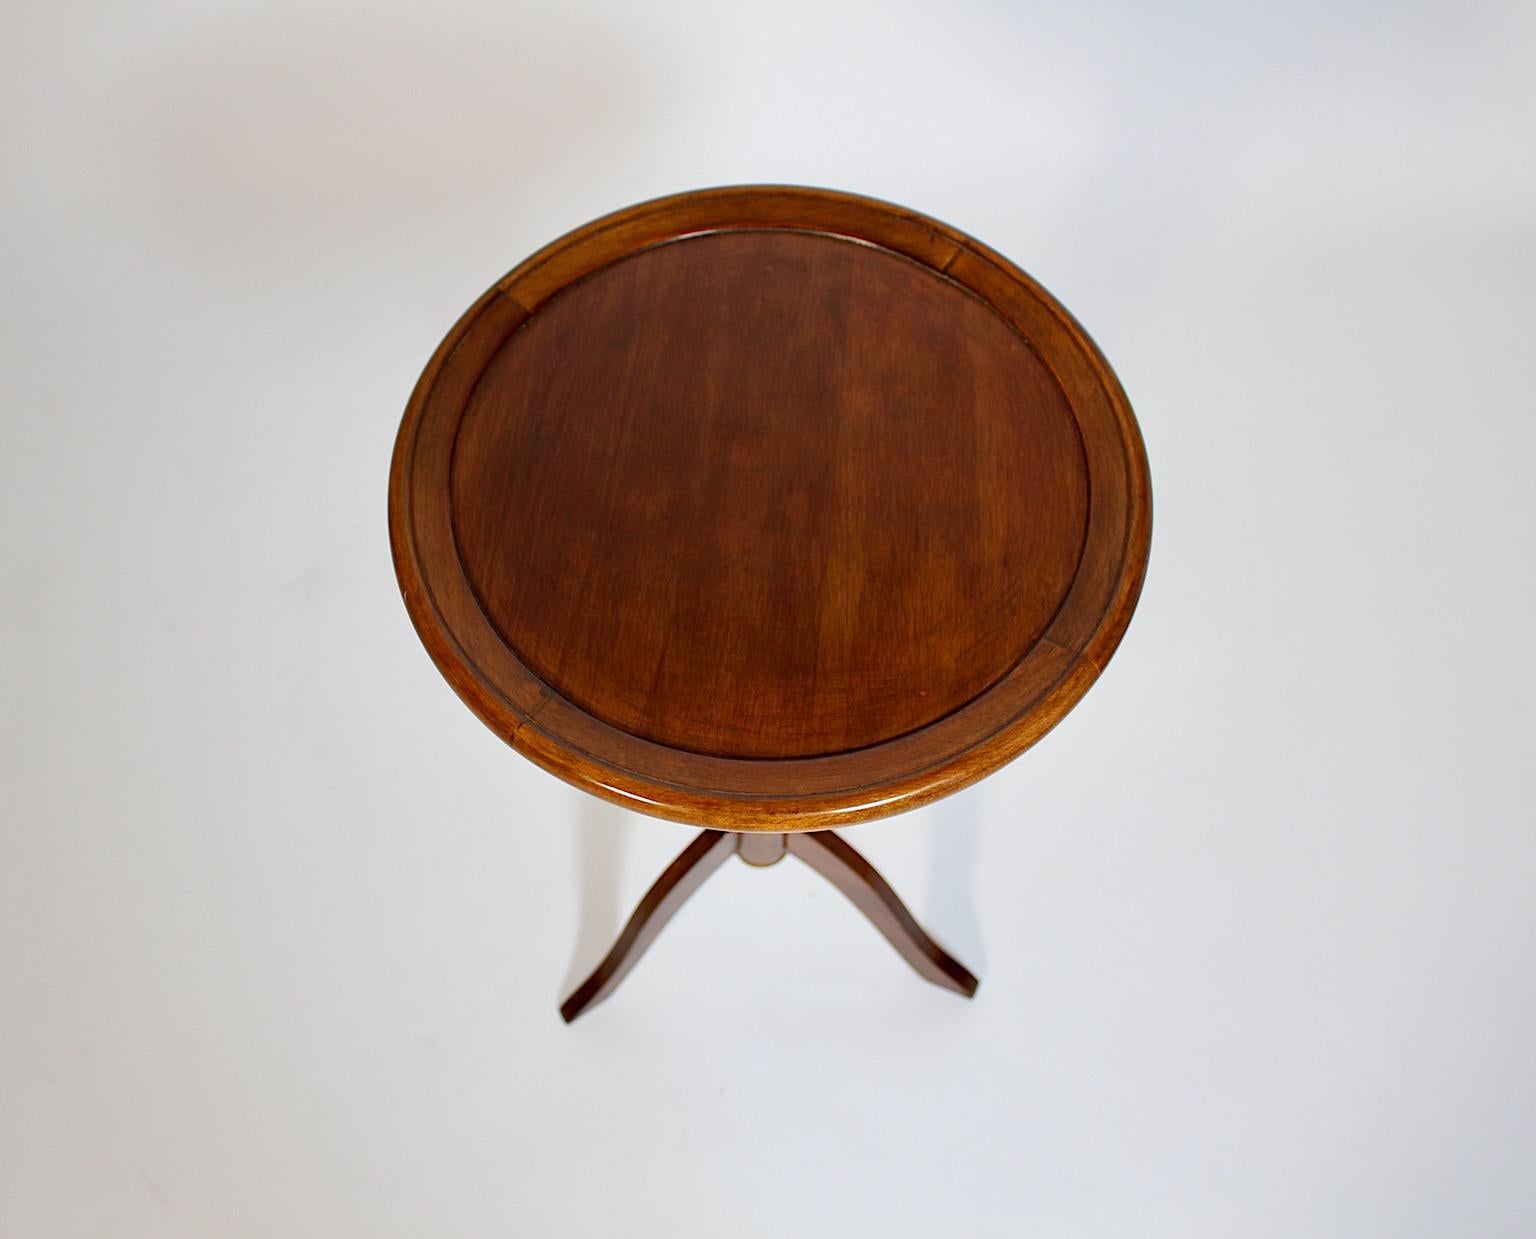 20th Century Modern Vintage Walnut Circular Side Table Turned Legs Italy 1970s For Sale